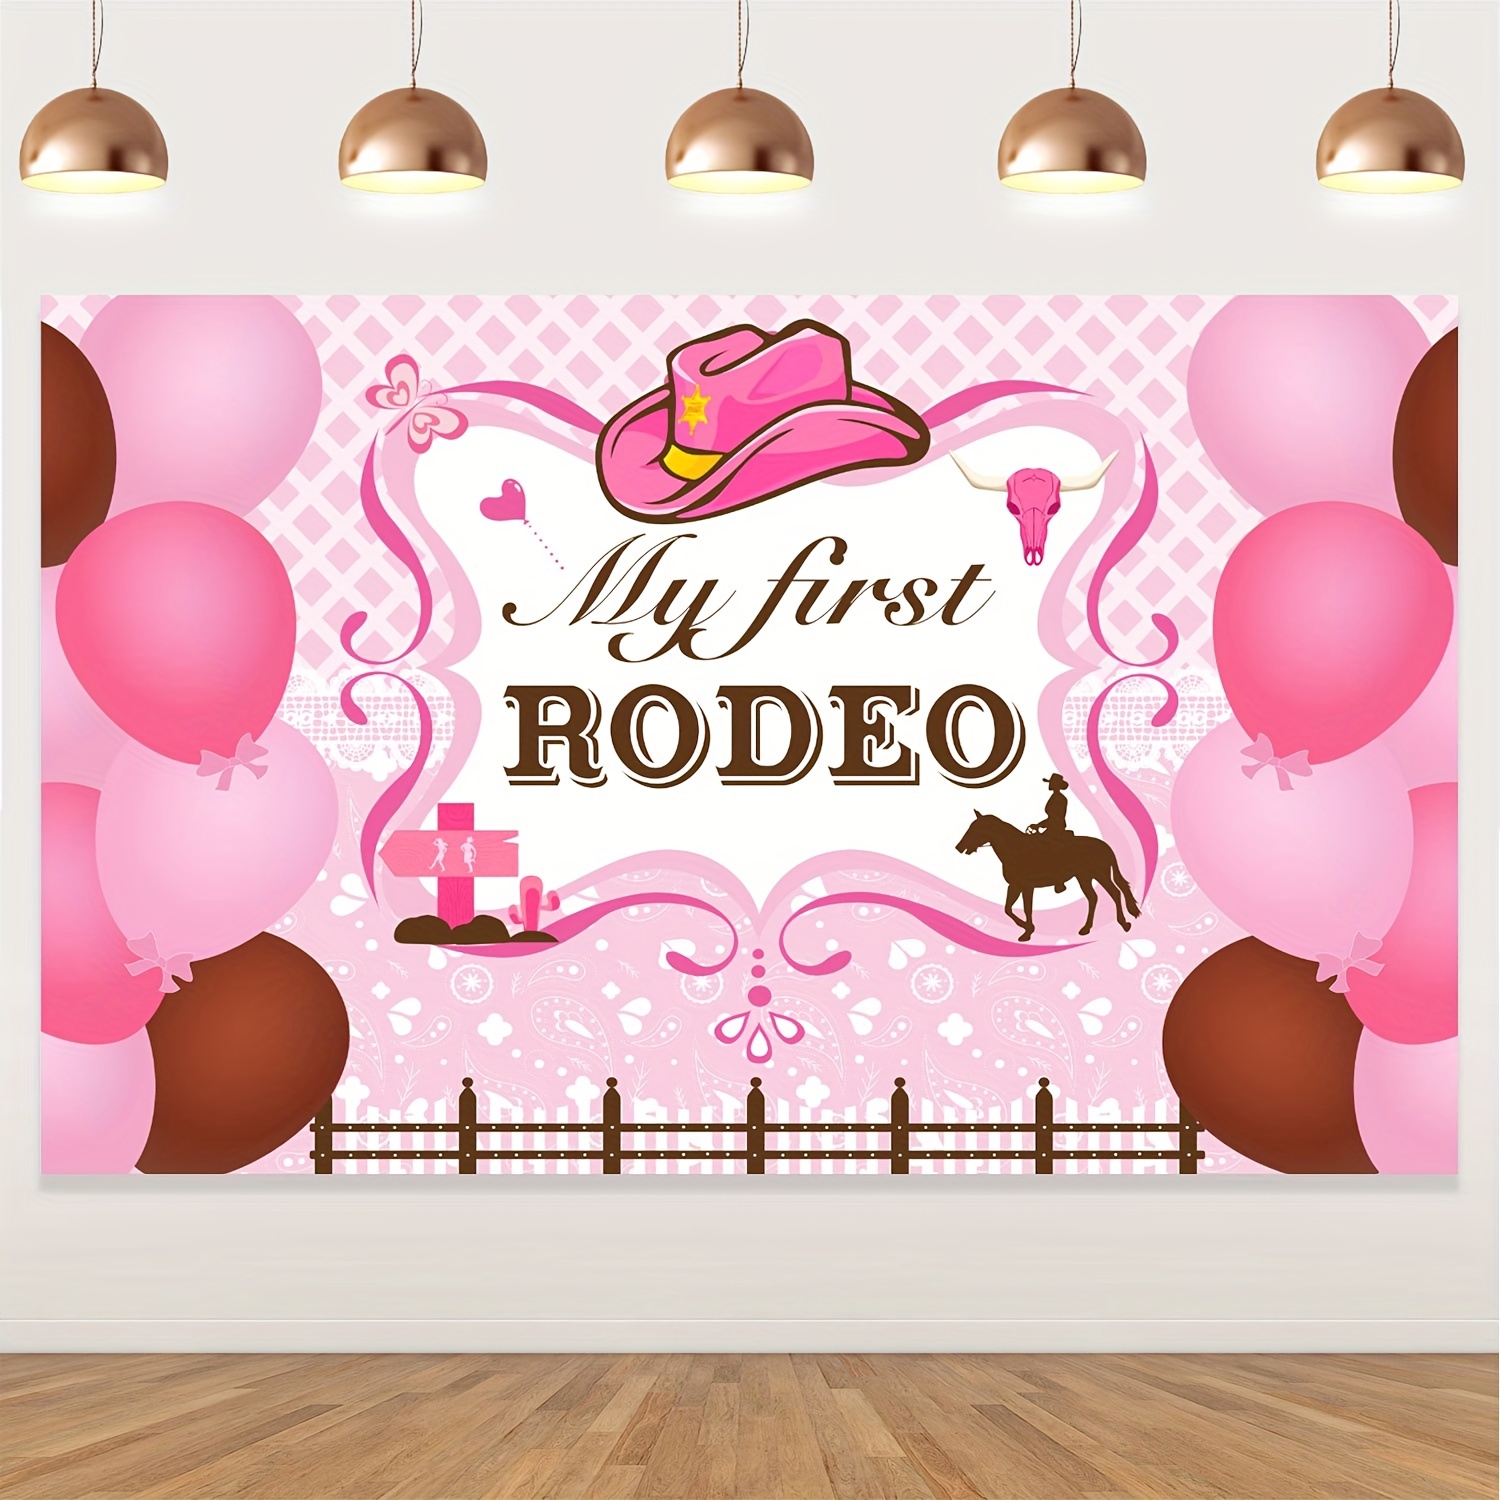 Let's Go Girls | Pink Cowboy Cowgirl Rodeo Hat Preppy Aesthetic  Bachelorette Party | HOWDY Y'ALL | White Background | Greeting Card